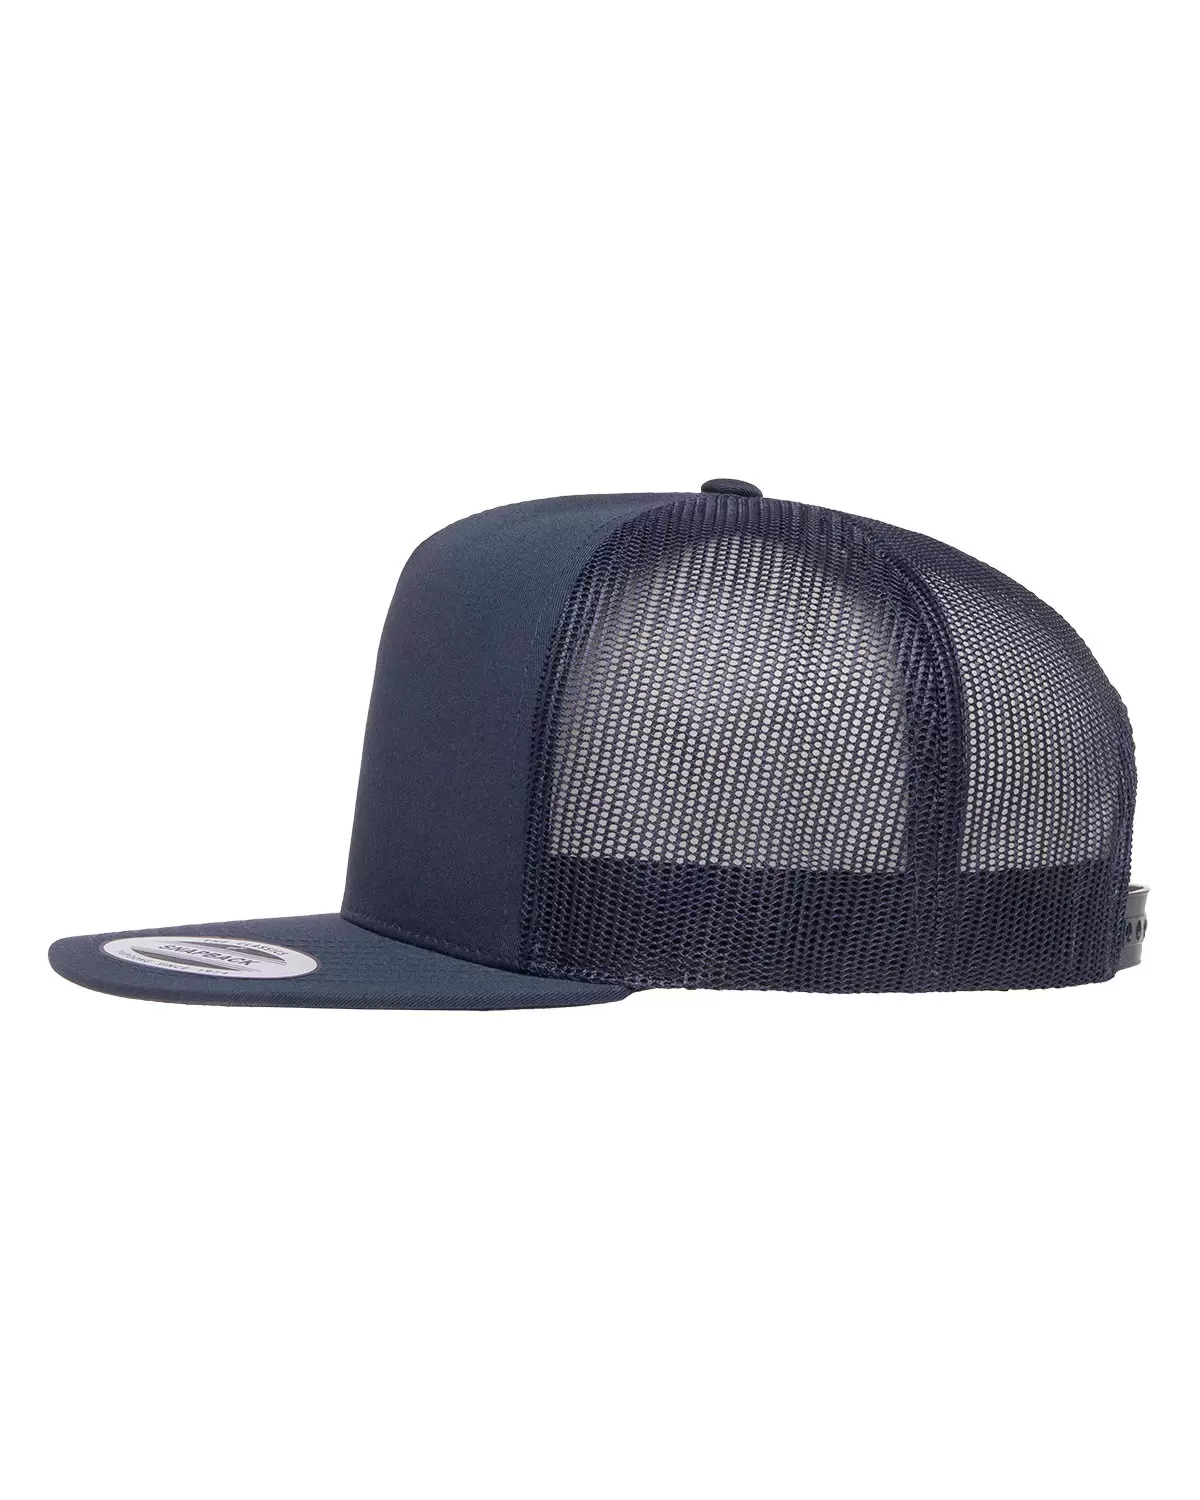 Yupoong-Flex Fit 6006 Five-Panel Classic Trucker Cap From 